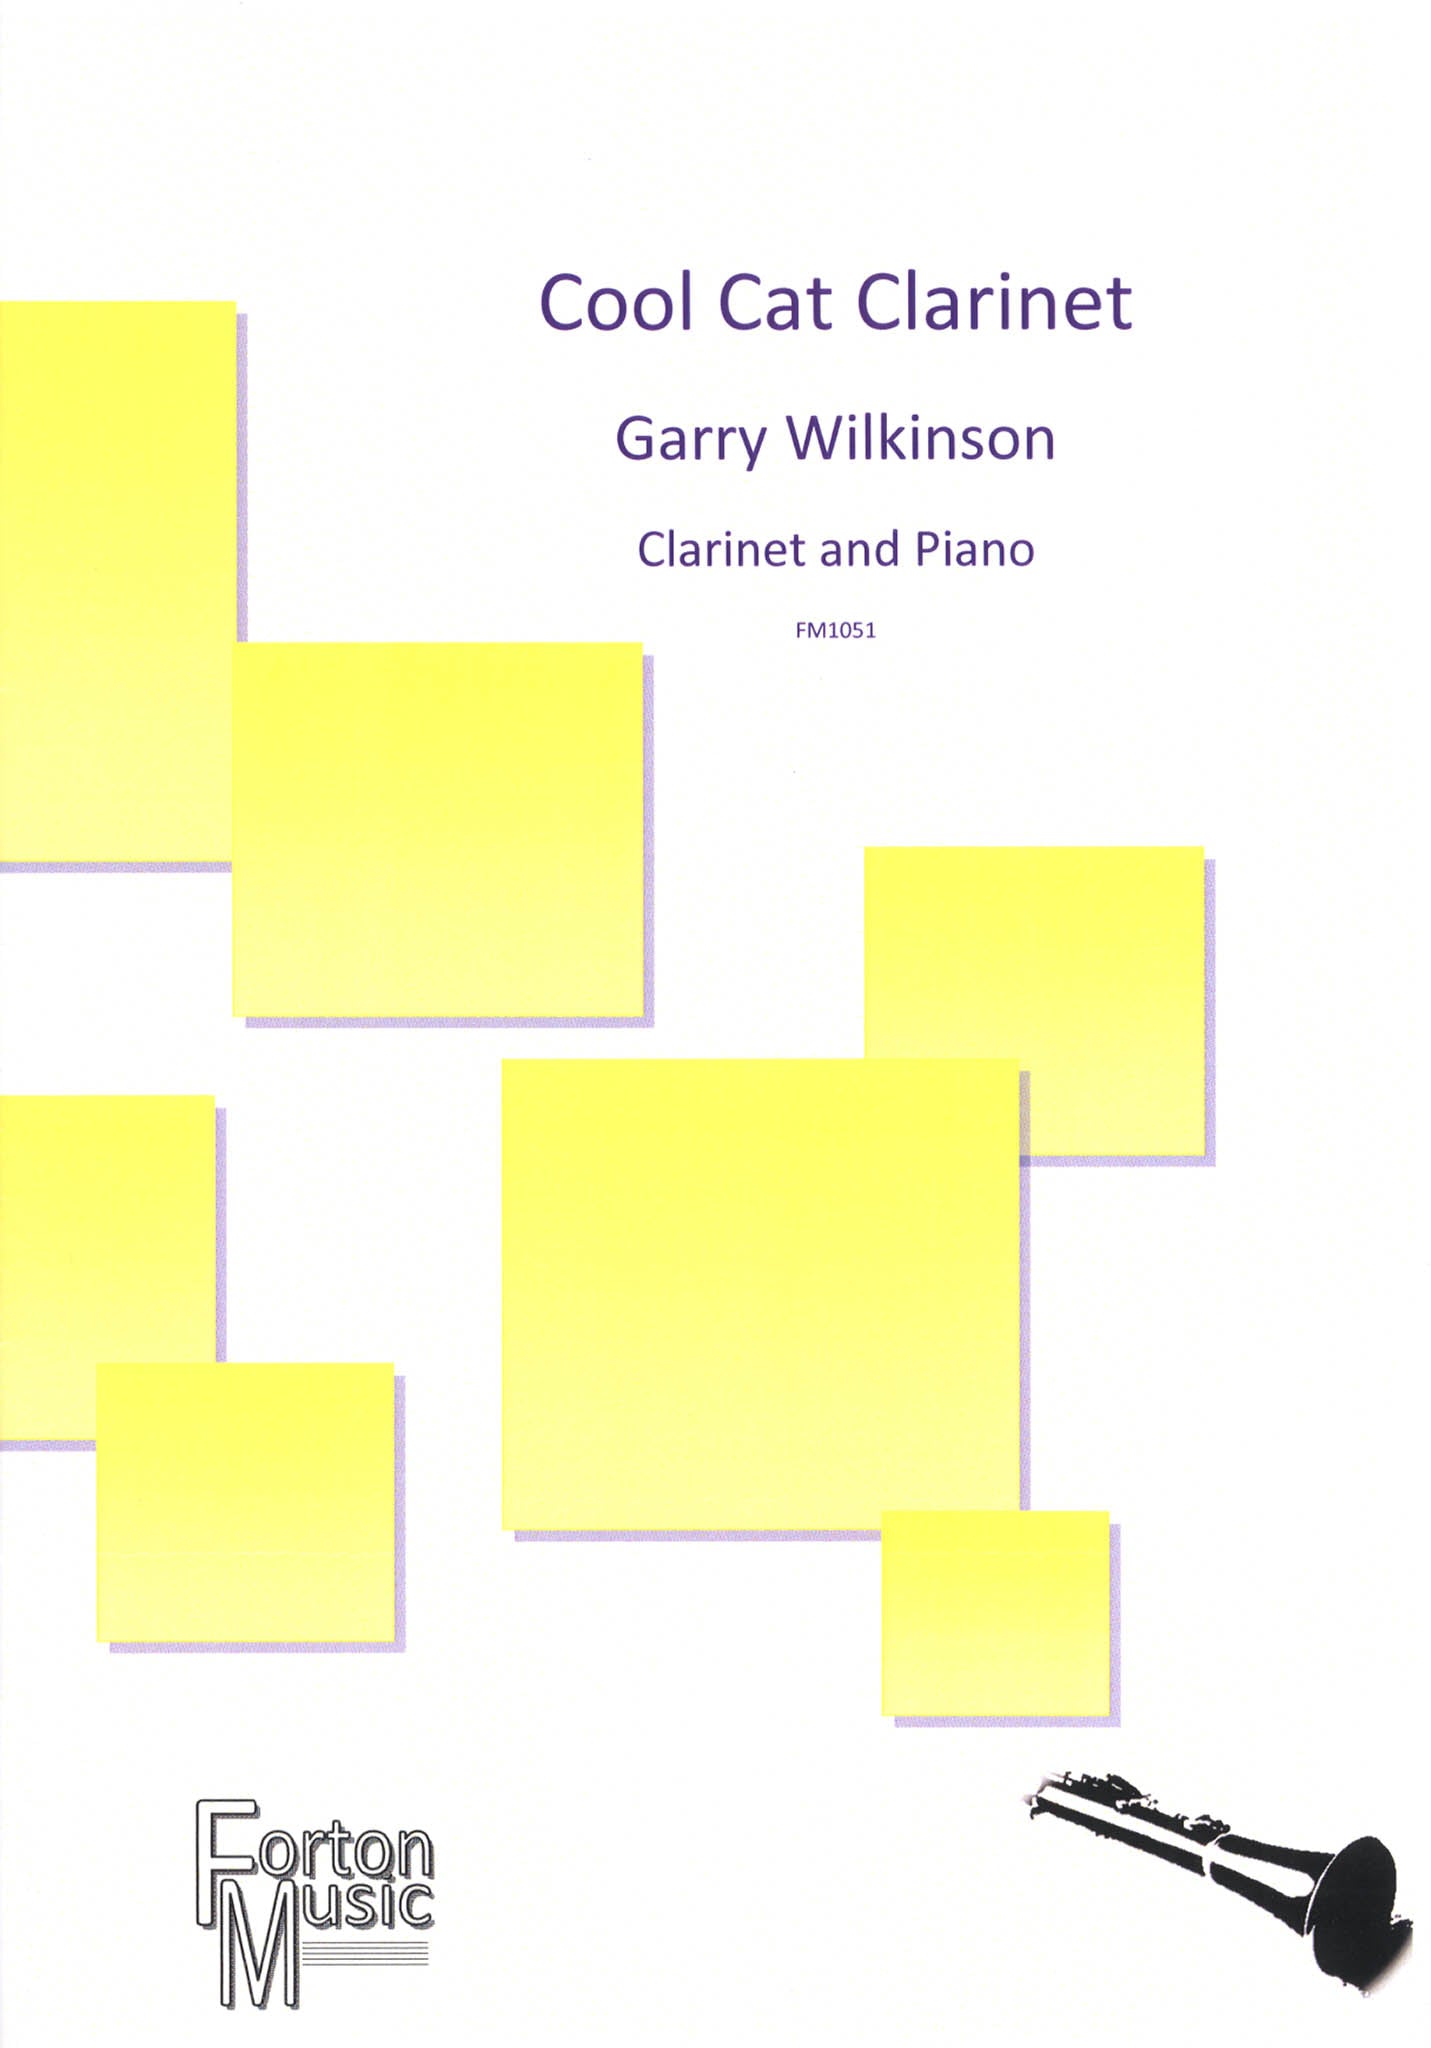 Garry Wilkinson Cool Cat Clarinet and piano cover